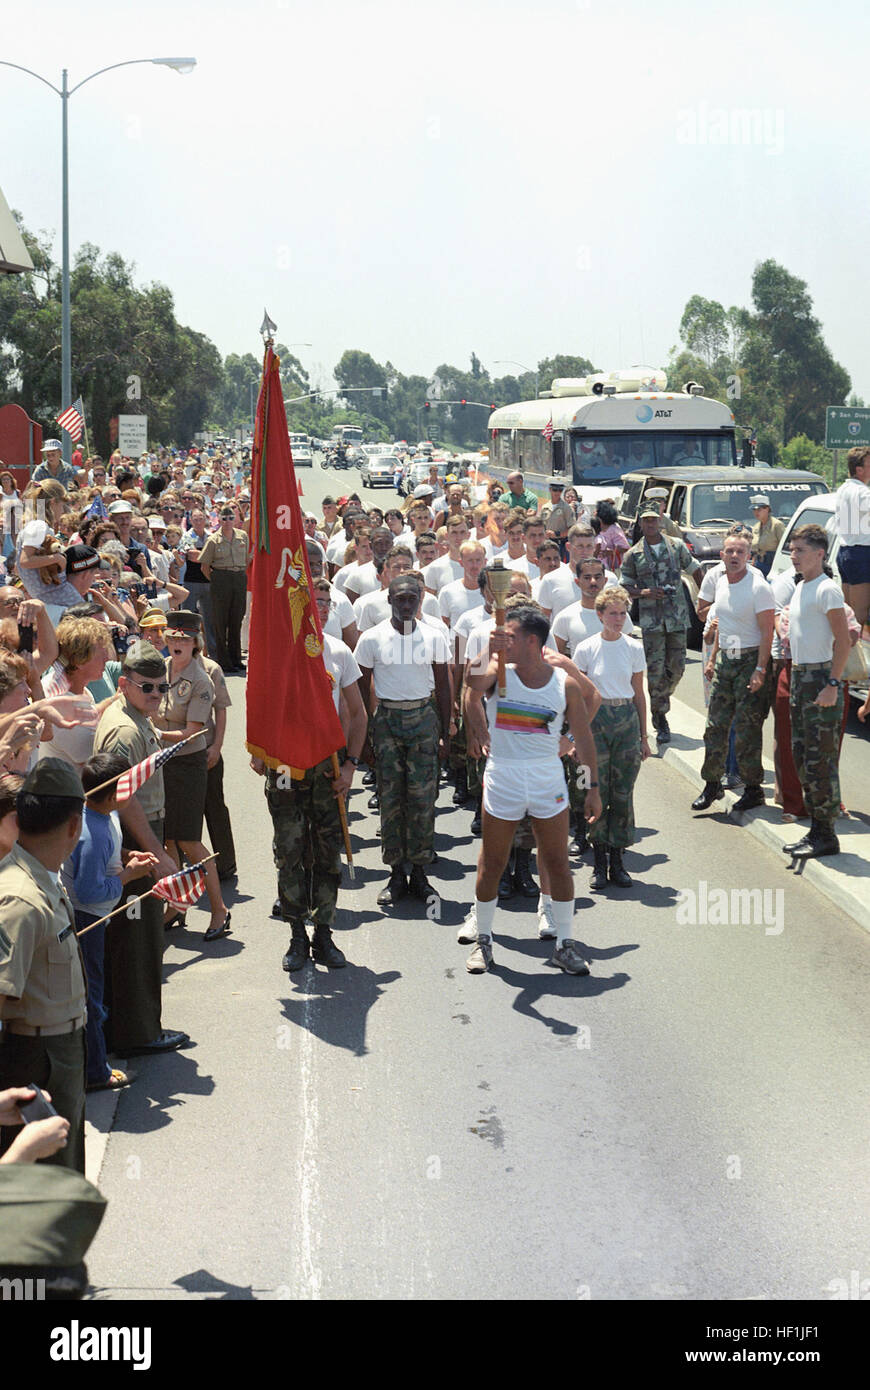 Warrant Officer Ralph Ramos of School Battalion leads a platoon as he carries the Olympic flame across the base on its way to the 23rd Olympic Games in Los Angeles. 1984 Summer Olympics torch relay 1984-07-25 3 Stock Photo